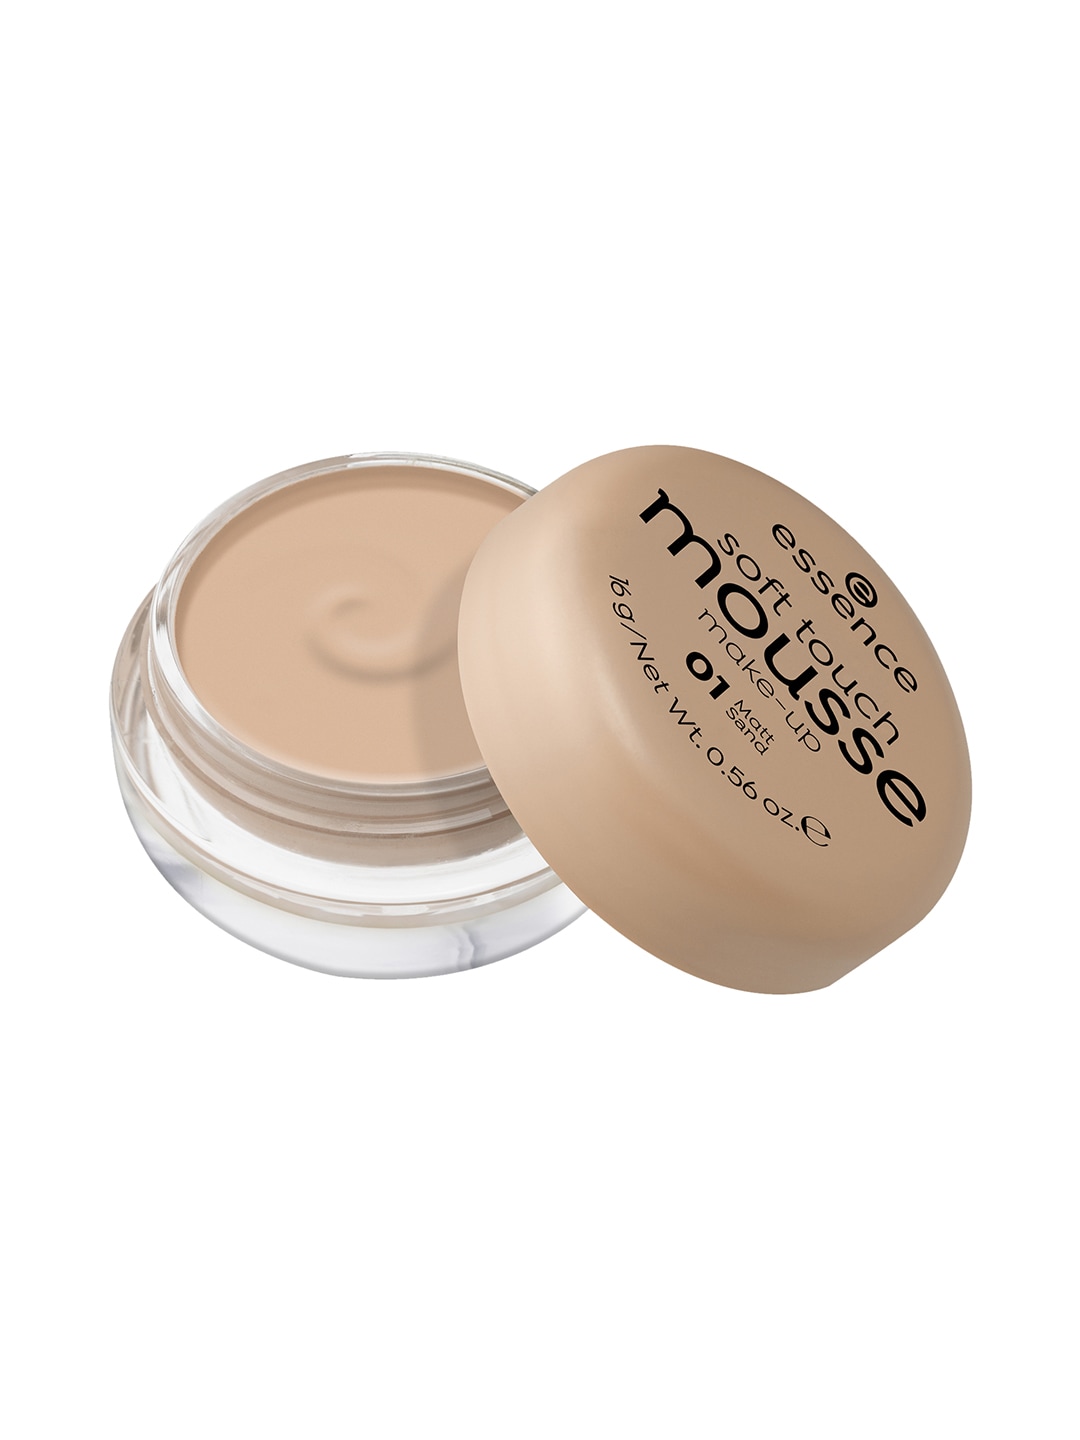 essence Soft Touch Make-Up Mousse Foundation 16 g - Matt Sand 01 Price in India